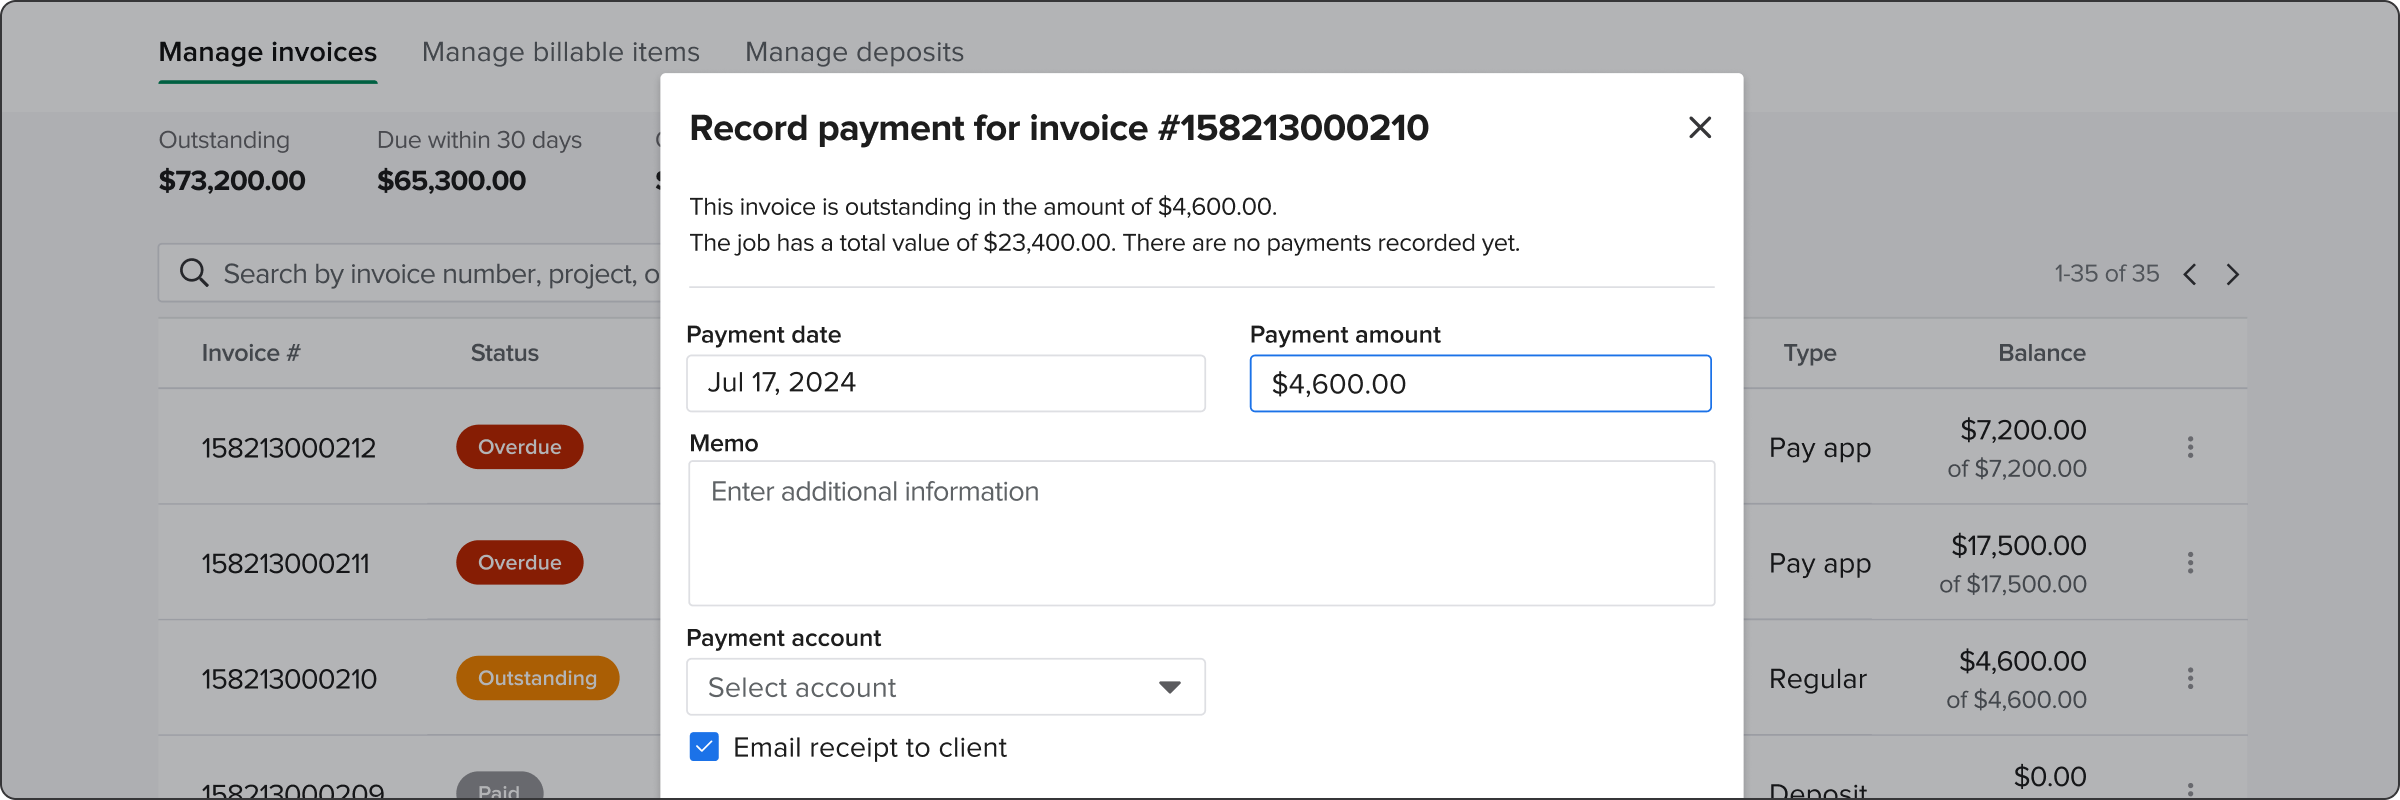 Product view displaying how to record payment for an outstanding invoice | Electrical contractor | Knowify